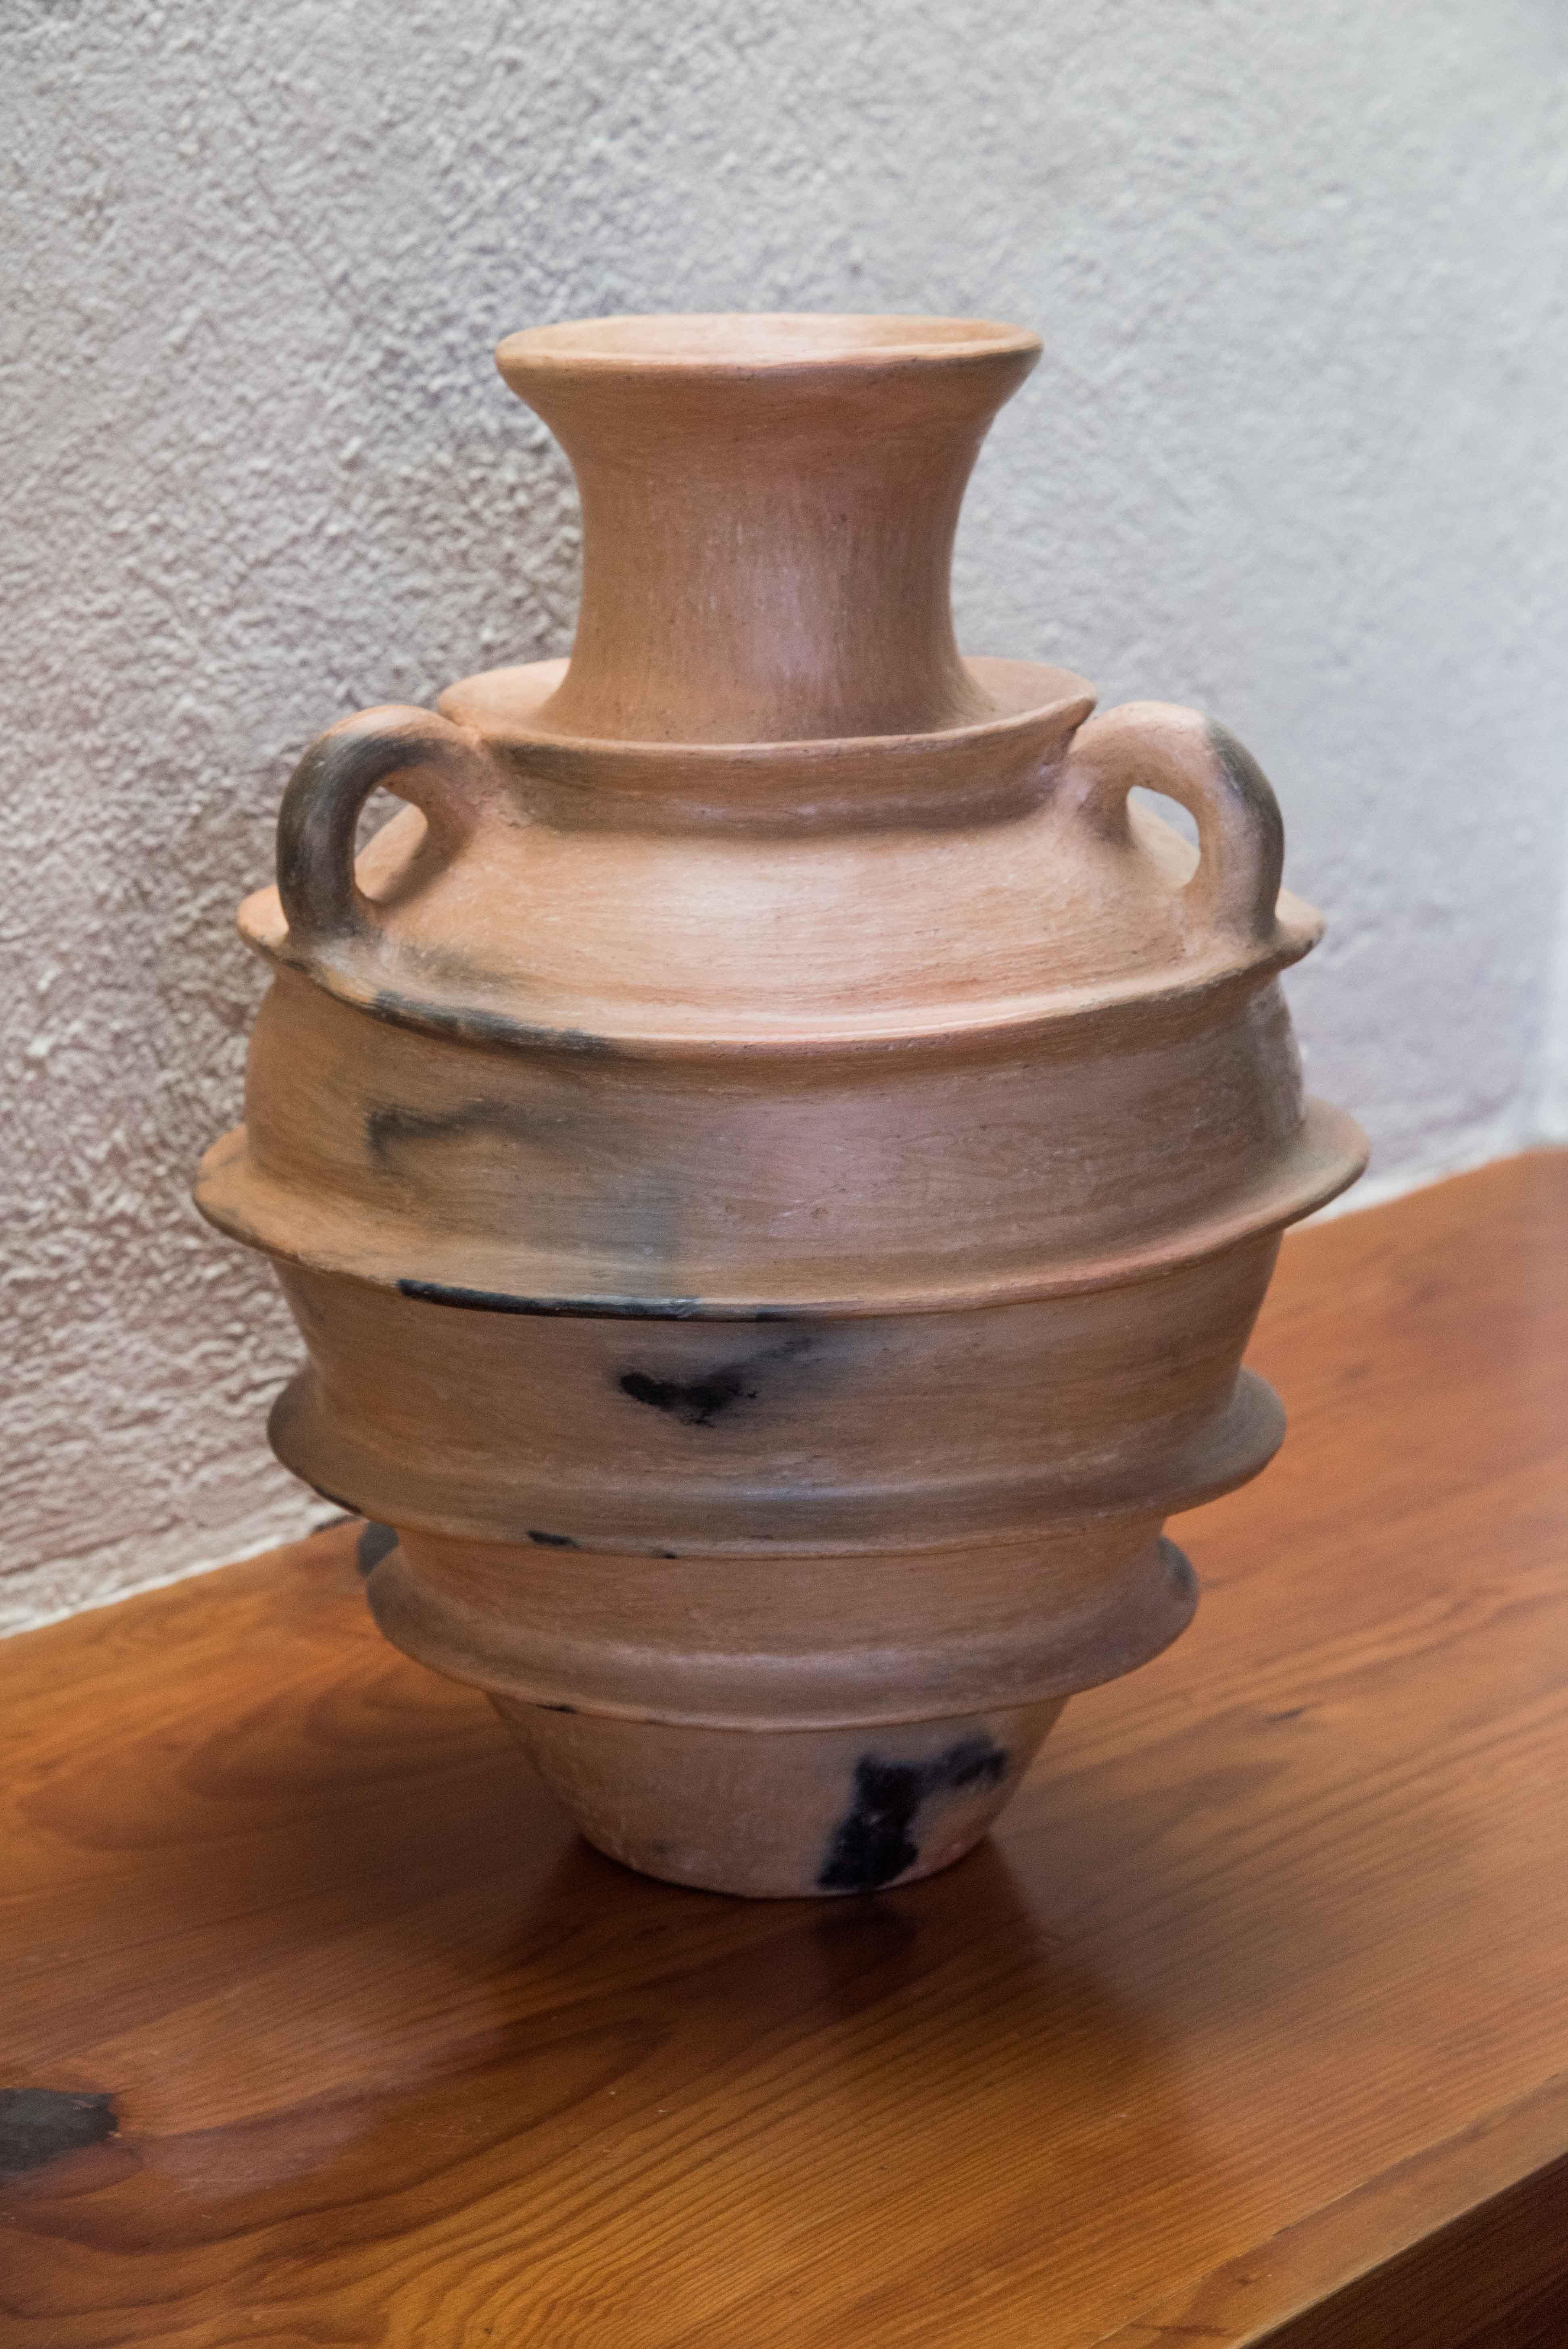 This rustic traditional pottery vase is the one of the most emblematic pieces from Silvia's work. Part of what makes her ceramic pieces so organic and natural is the process and native Oaxacan clay that Martinez uses to produce her pieces. 

In